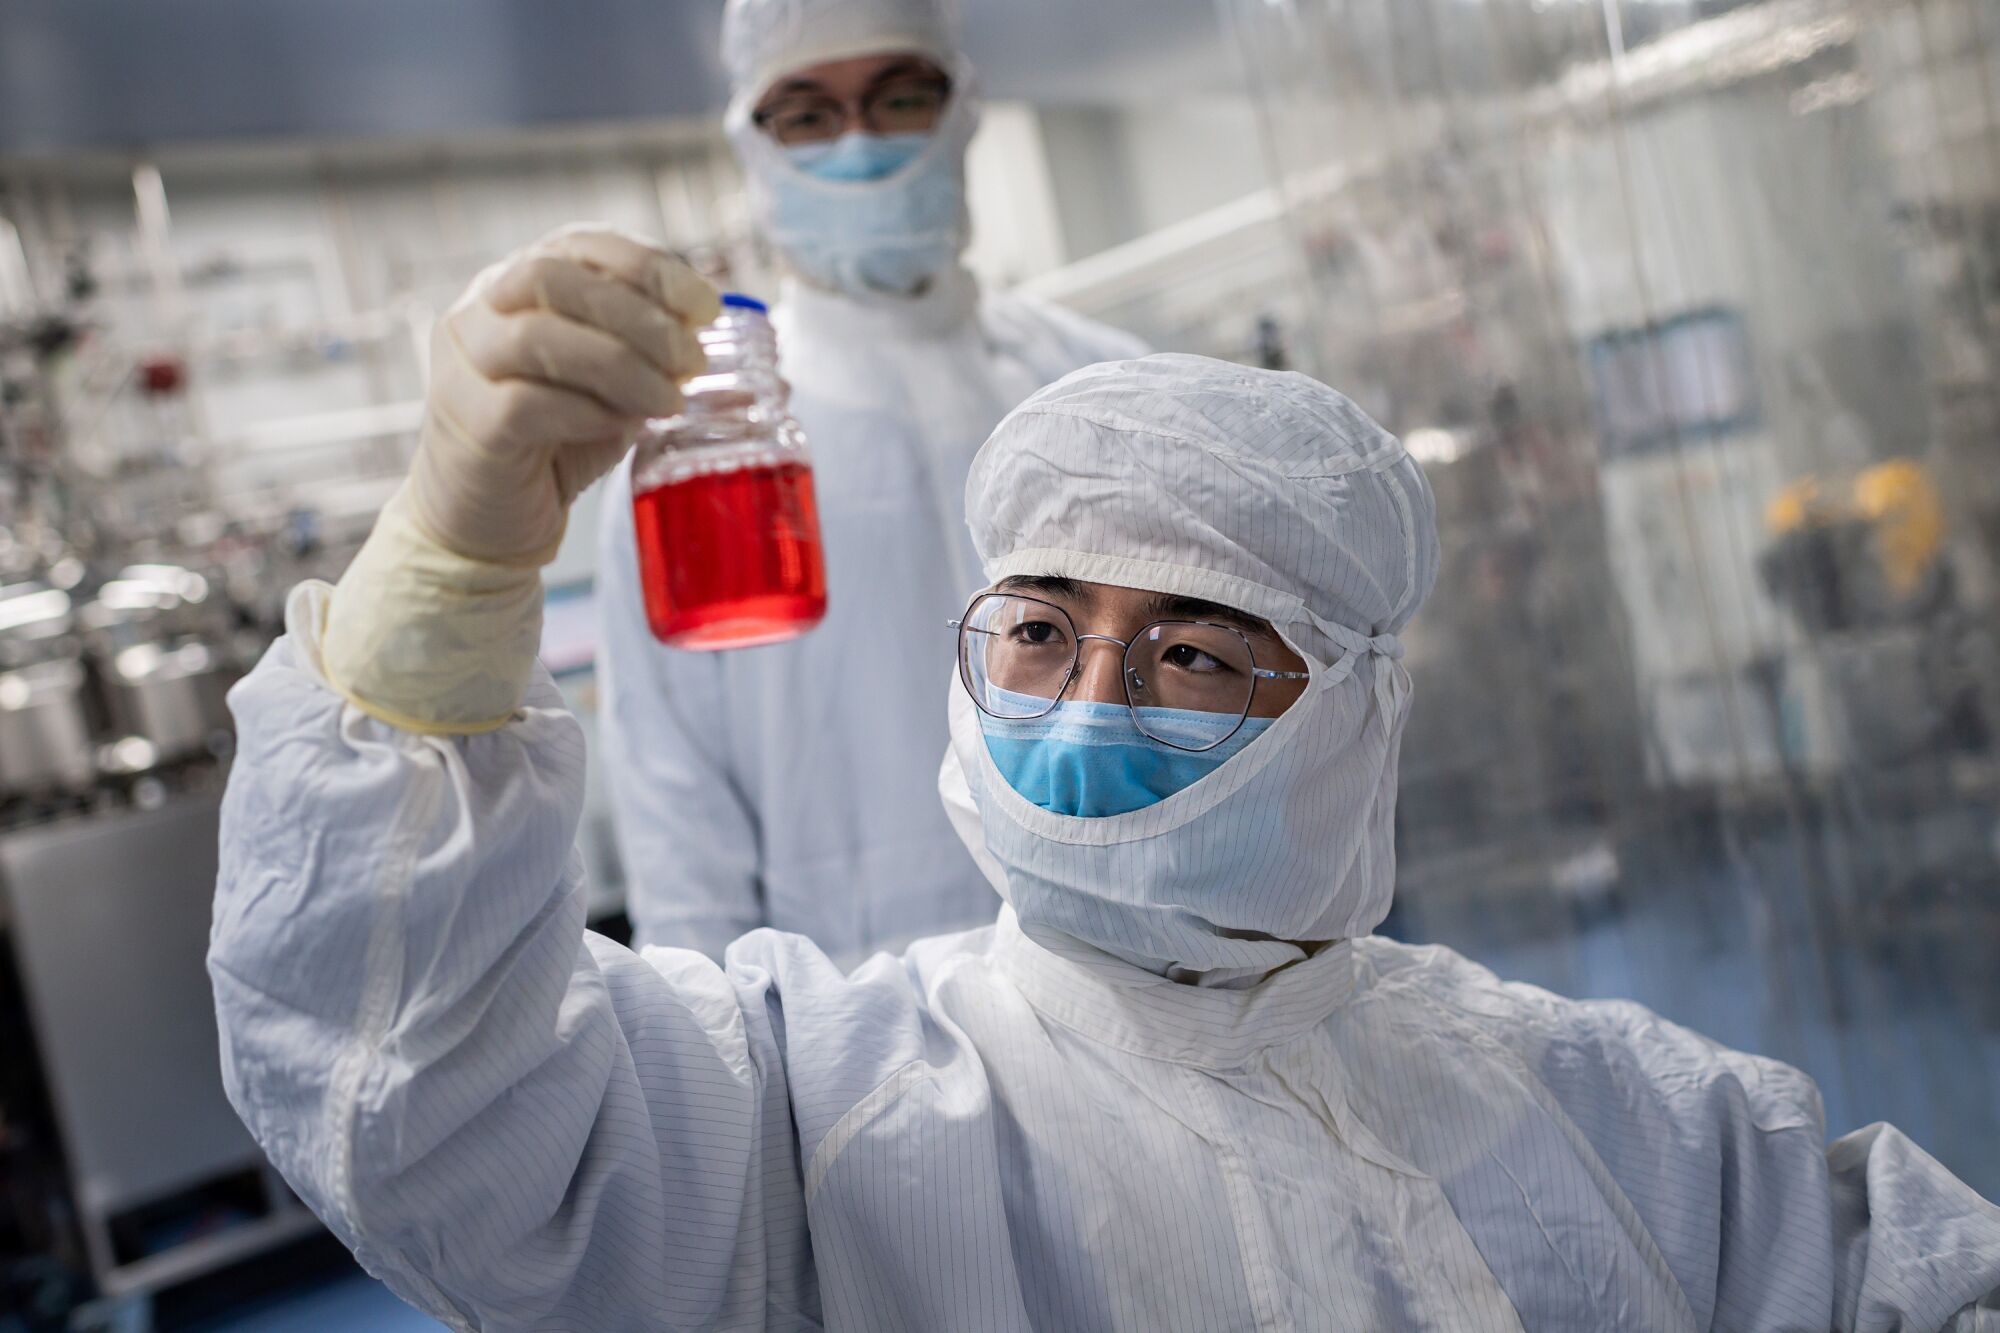 An engineer at Sinovac Biotech in Beijing looks at monkey kidney cells as he tests an experimental COVID-19 vaccine.